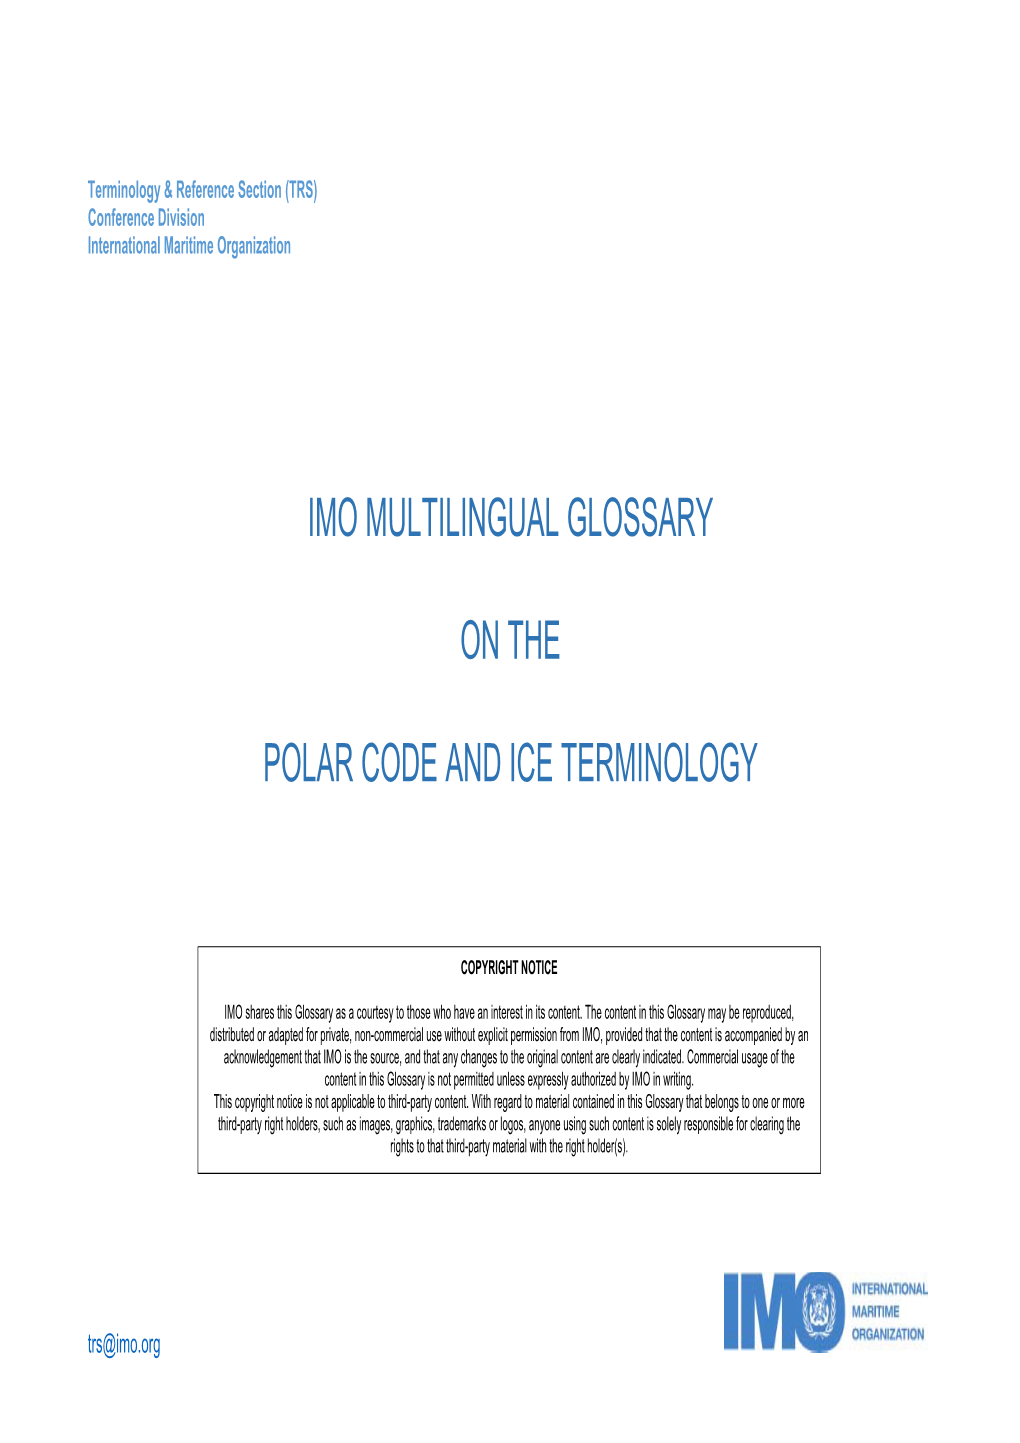 Imo Multilingual Glossary on the Polar Code and Ice